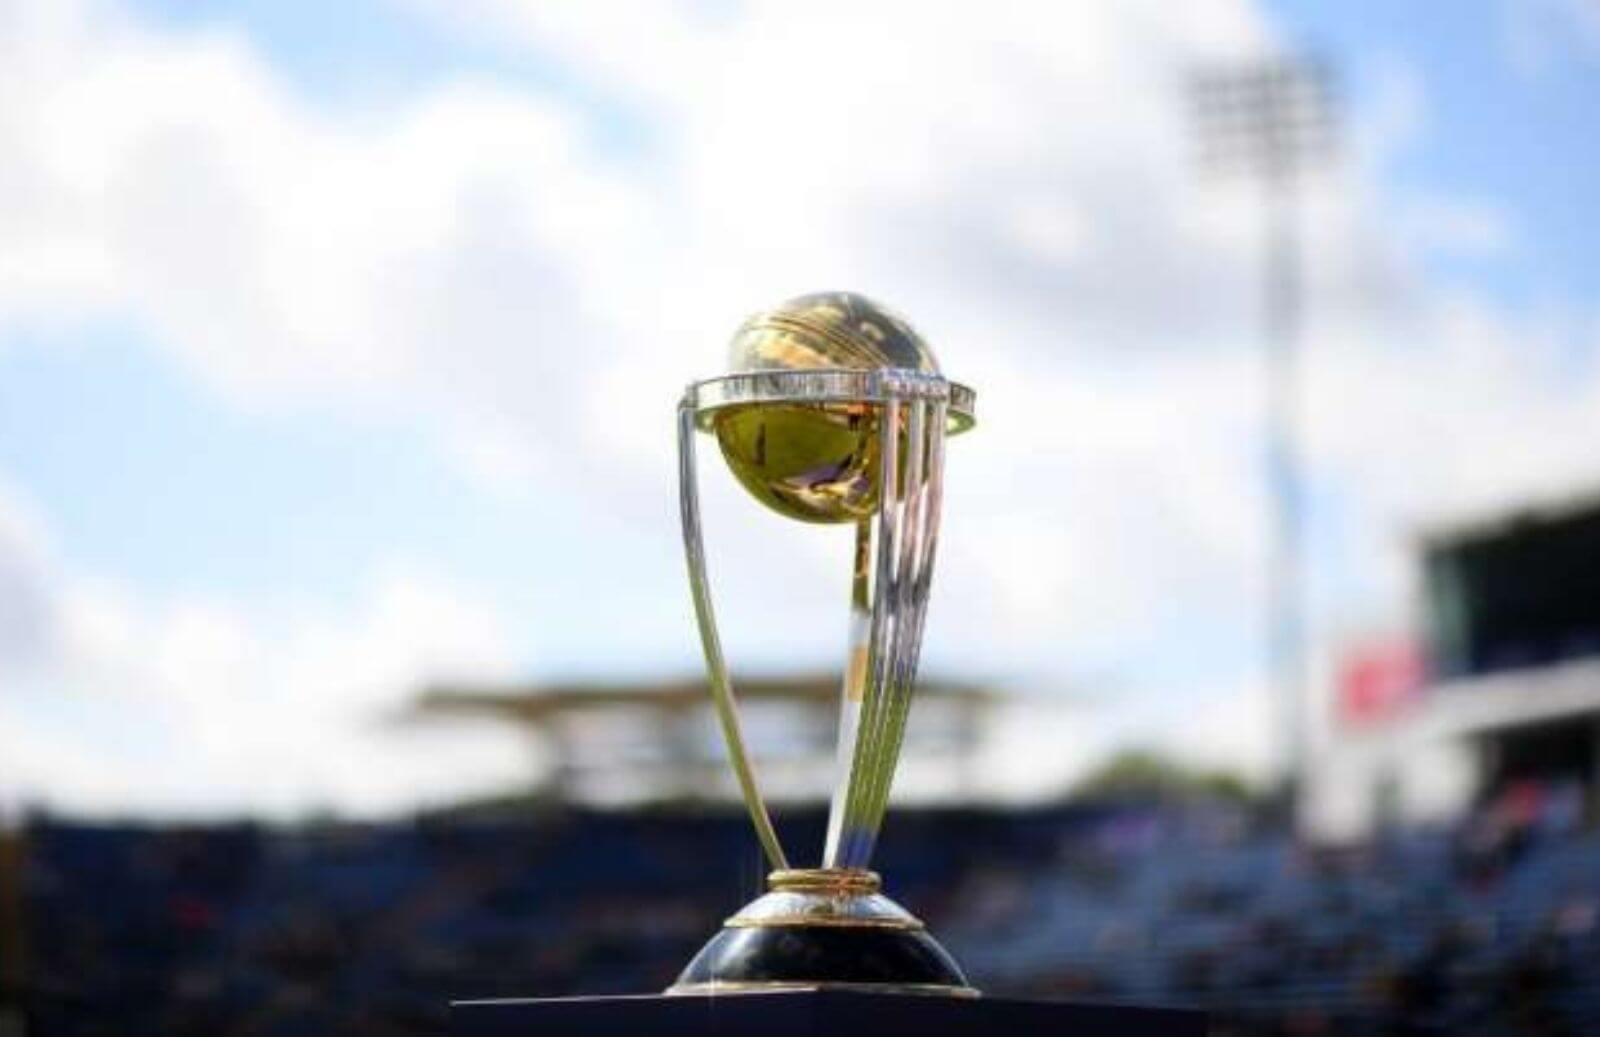 ICC Announced Schedule For 2023 ODI World Cup Qualifiers, Zimbabwe To Host The Event, Reschedule 96 ODIs